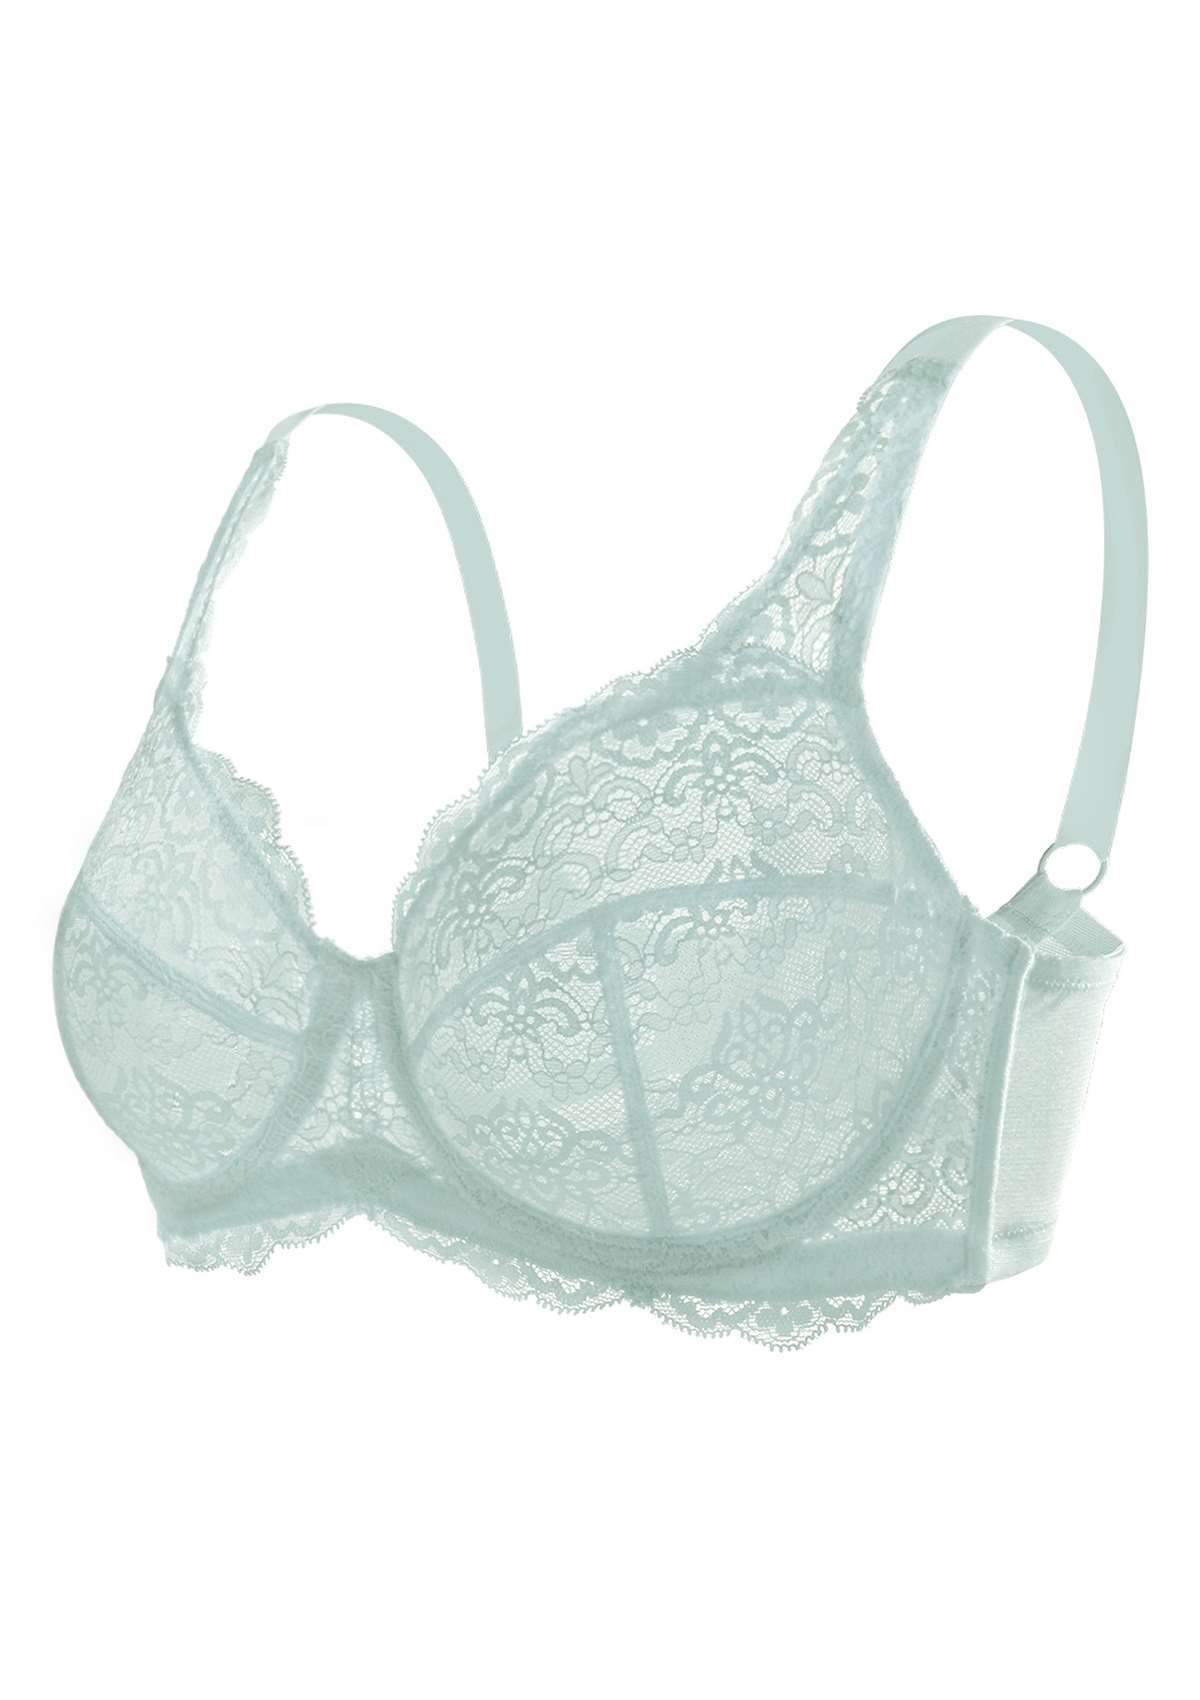 HSIA All-Over Floral Lace: Best Bra For Elderly With Sagging Breasts - Pewter Blue / 36 / C